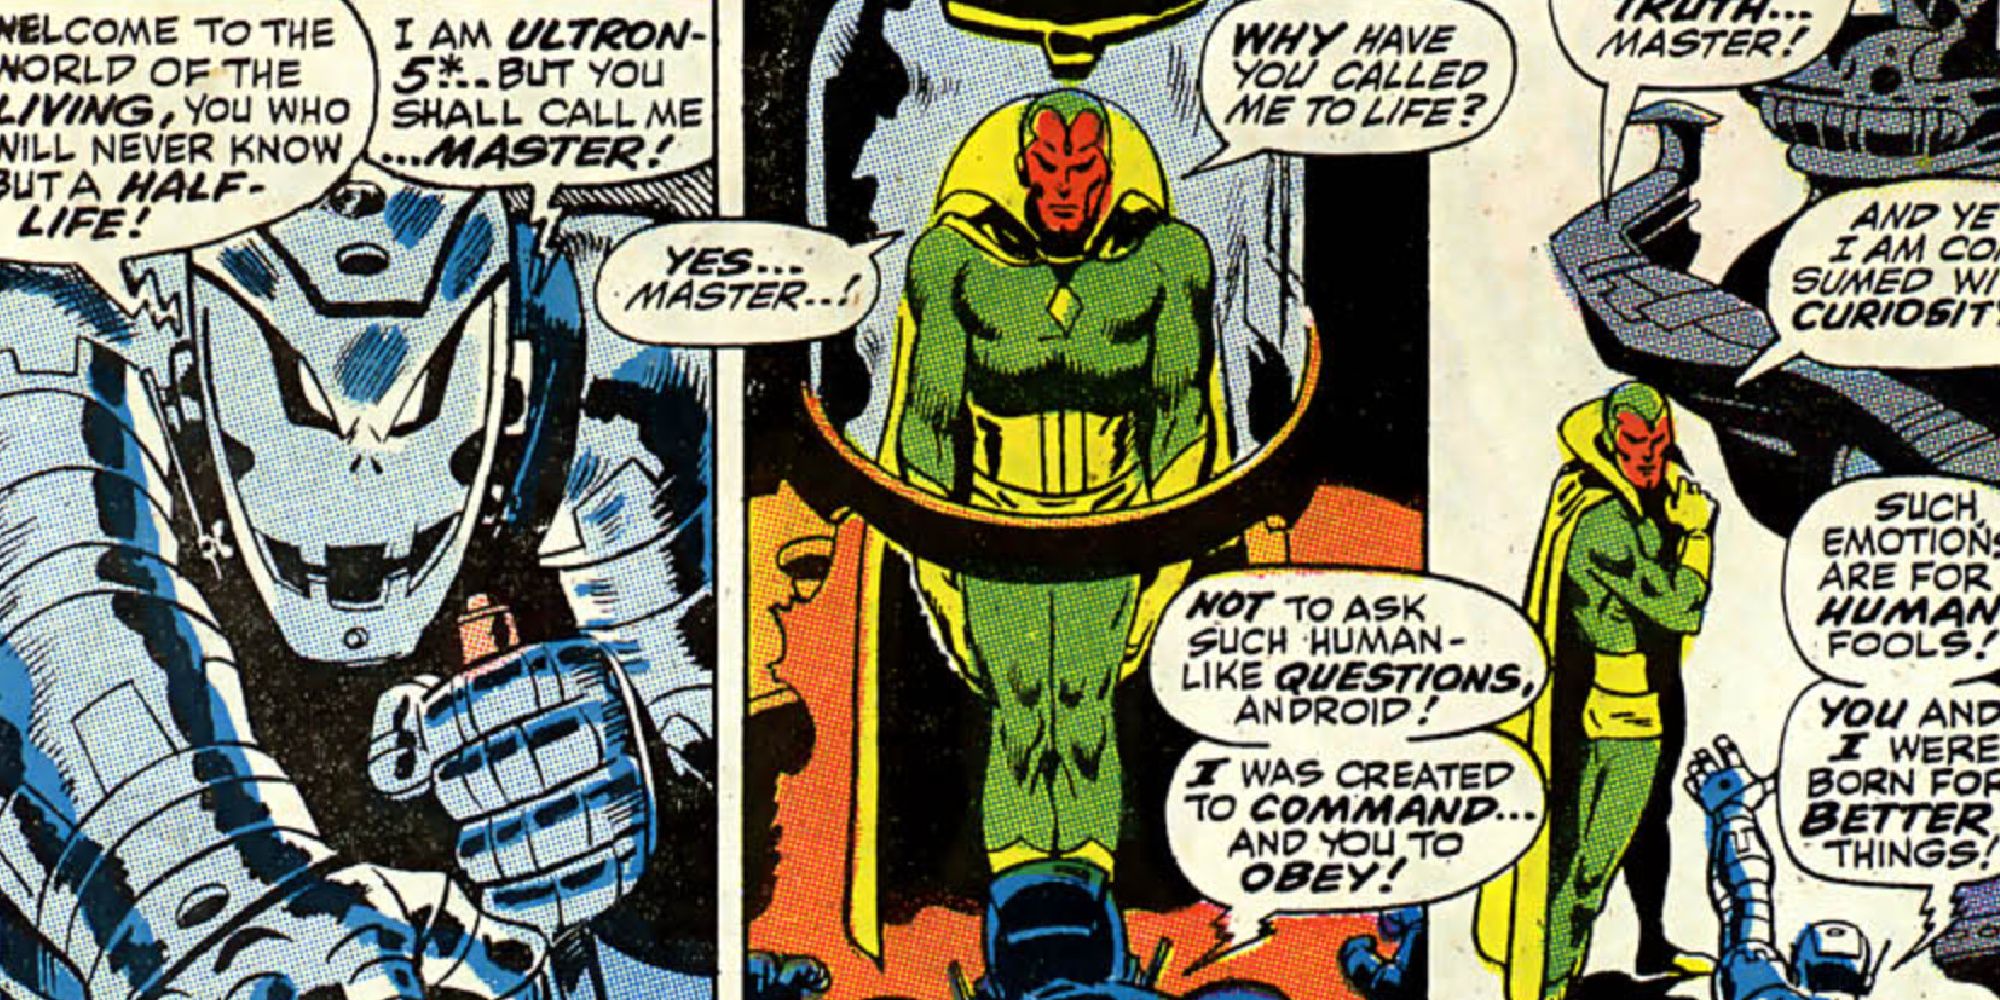 Ultron creates The Vision in Marvel Comics.